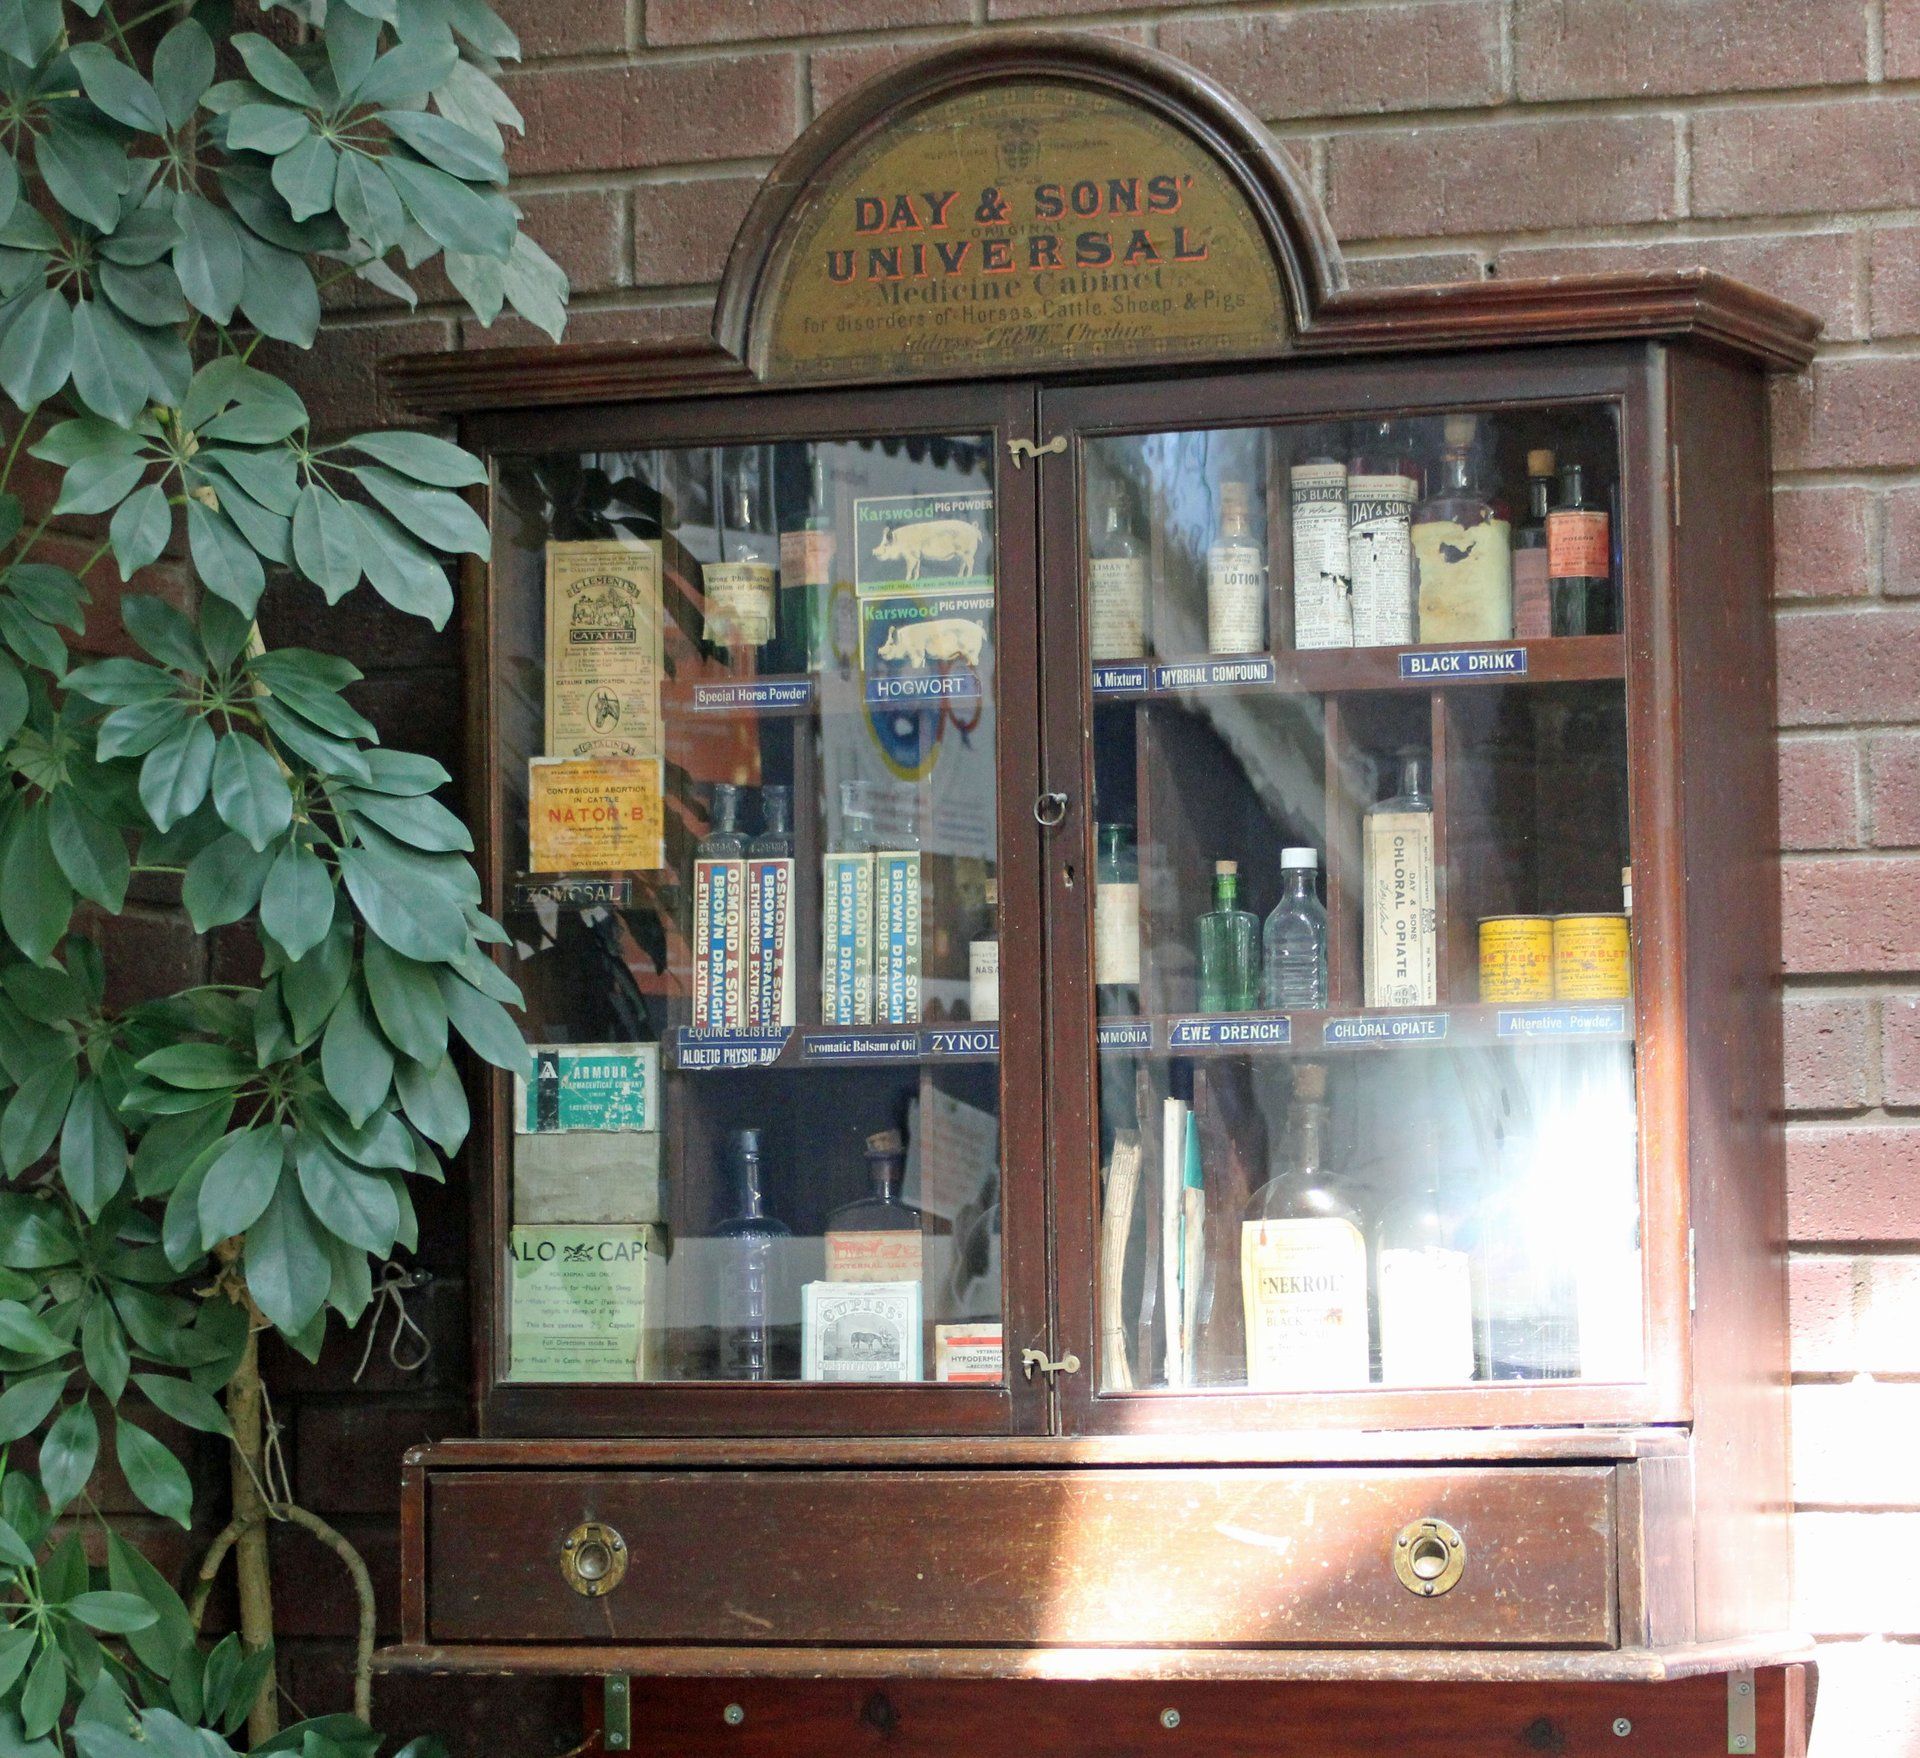 The historical veterinary cabinet